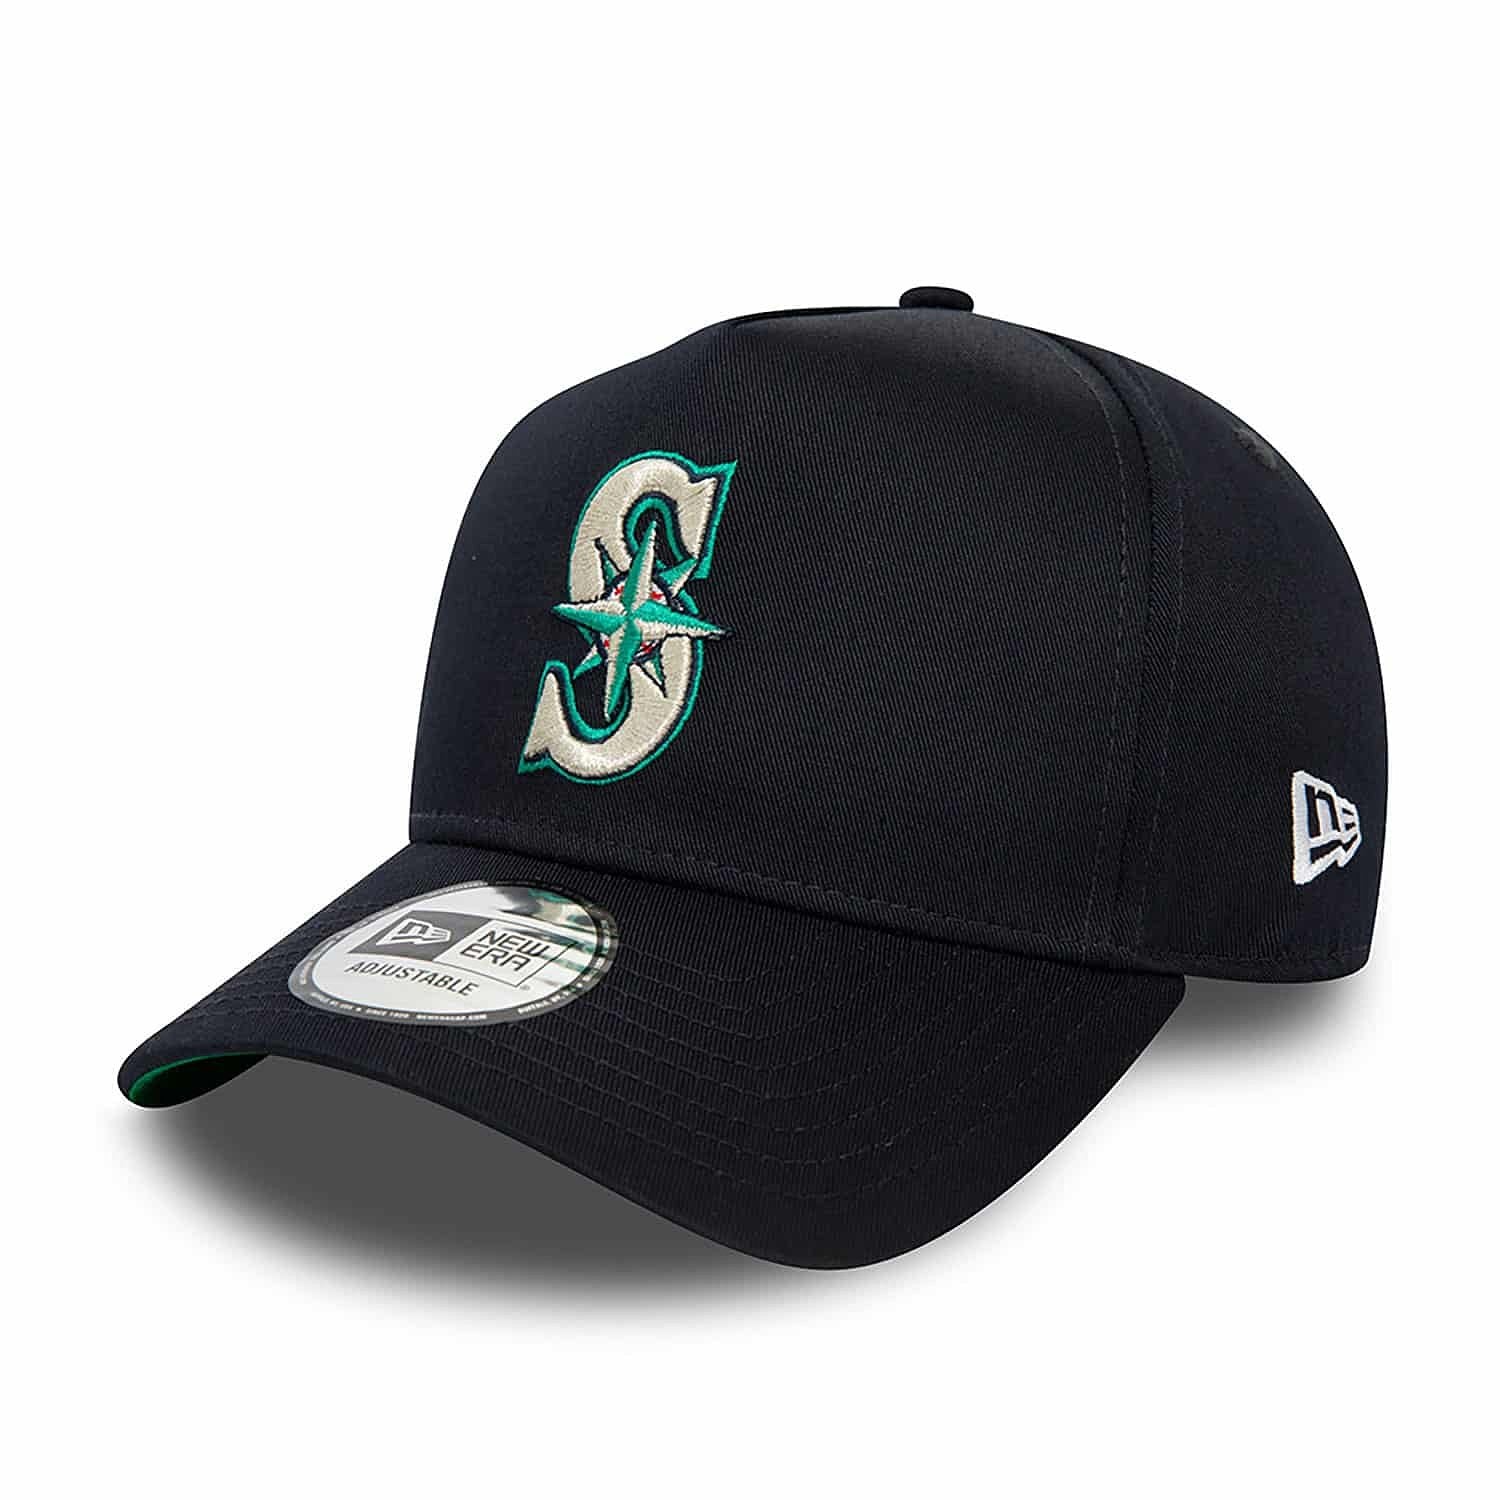 New Era - Seattle Mariners World Series Patch Navy 9FORTY E-Frame Adjustable Cap